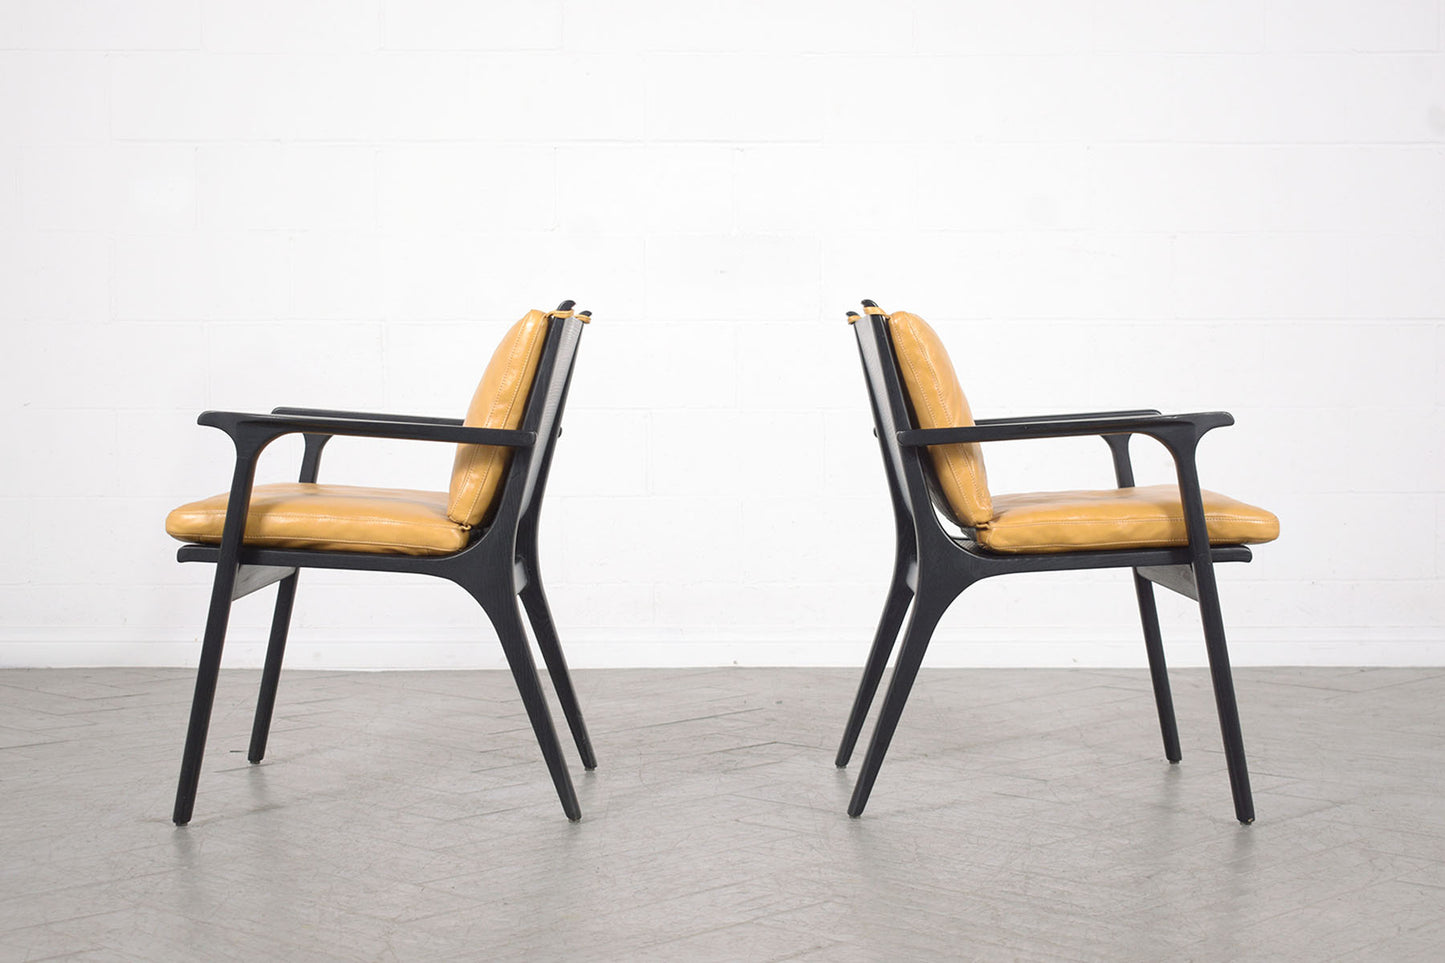 Pair of Modern Yellow Leather Oak Armchairs